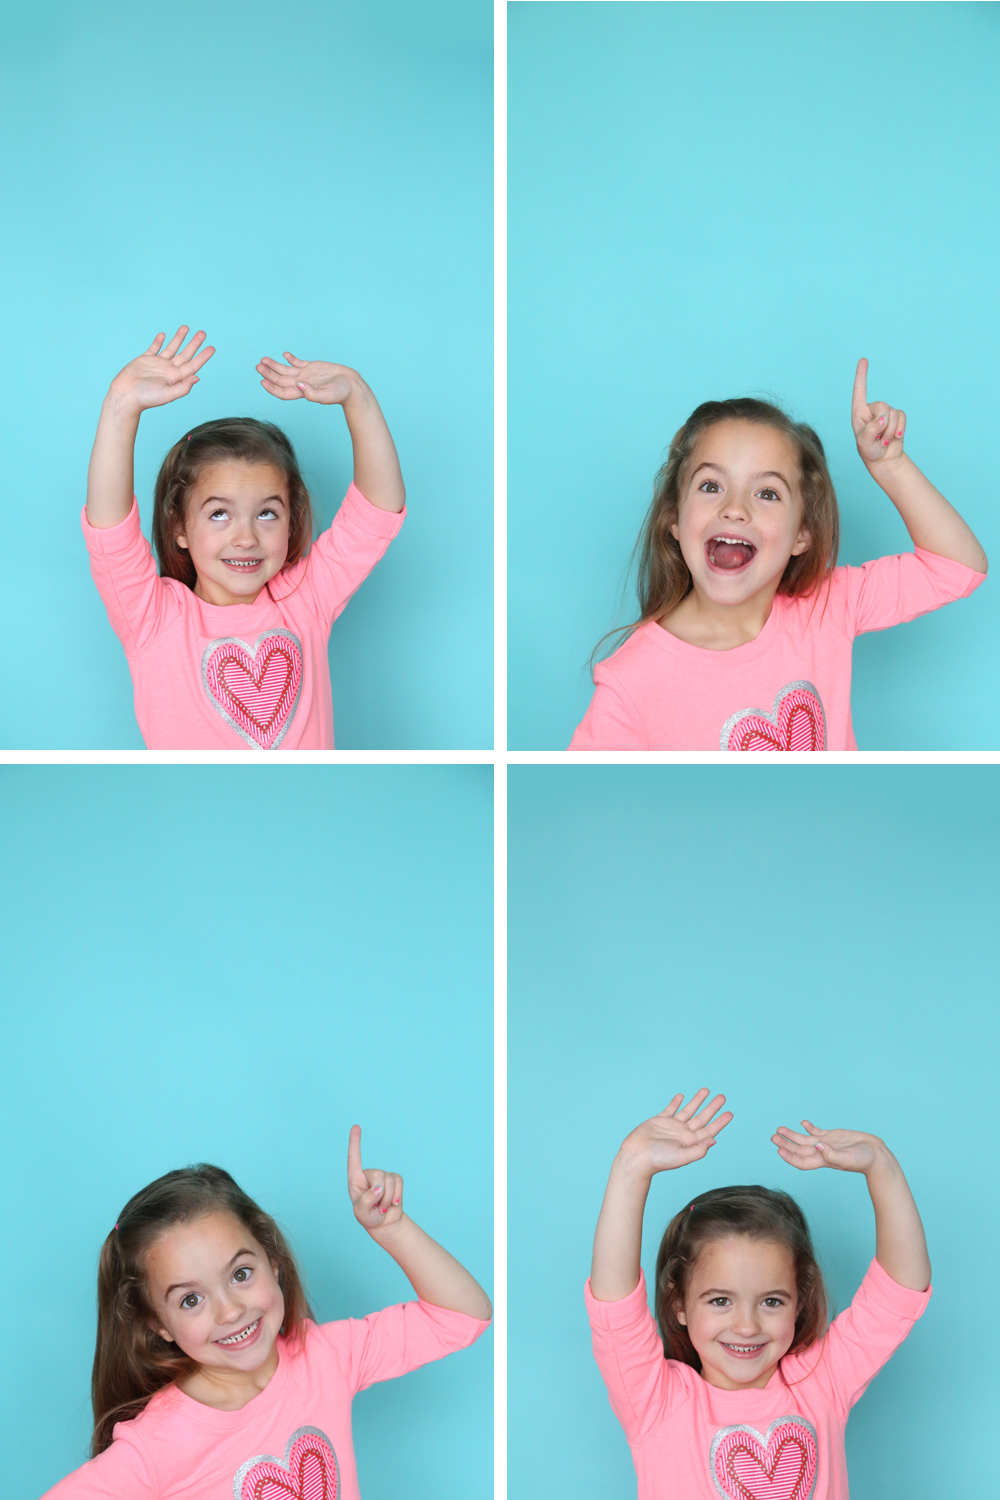 Photos of a little girl with her arms above her head